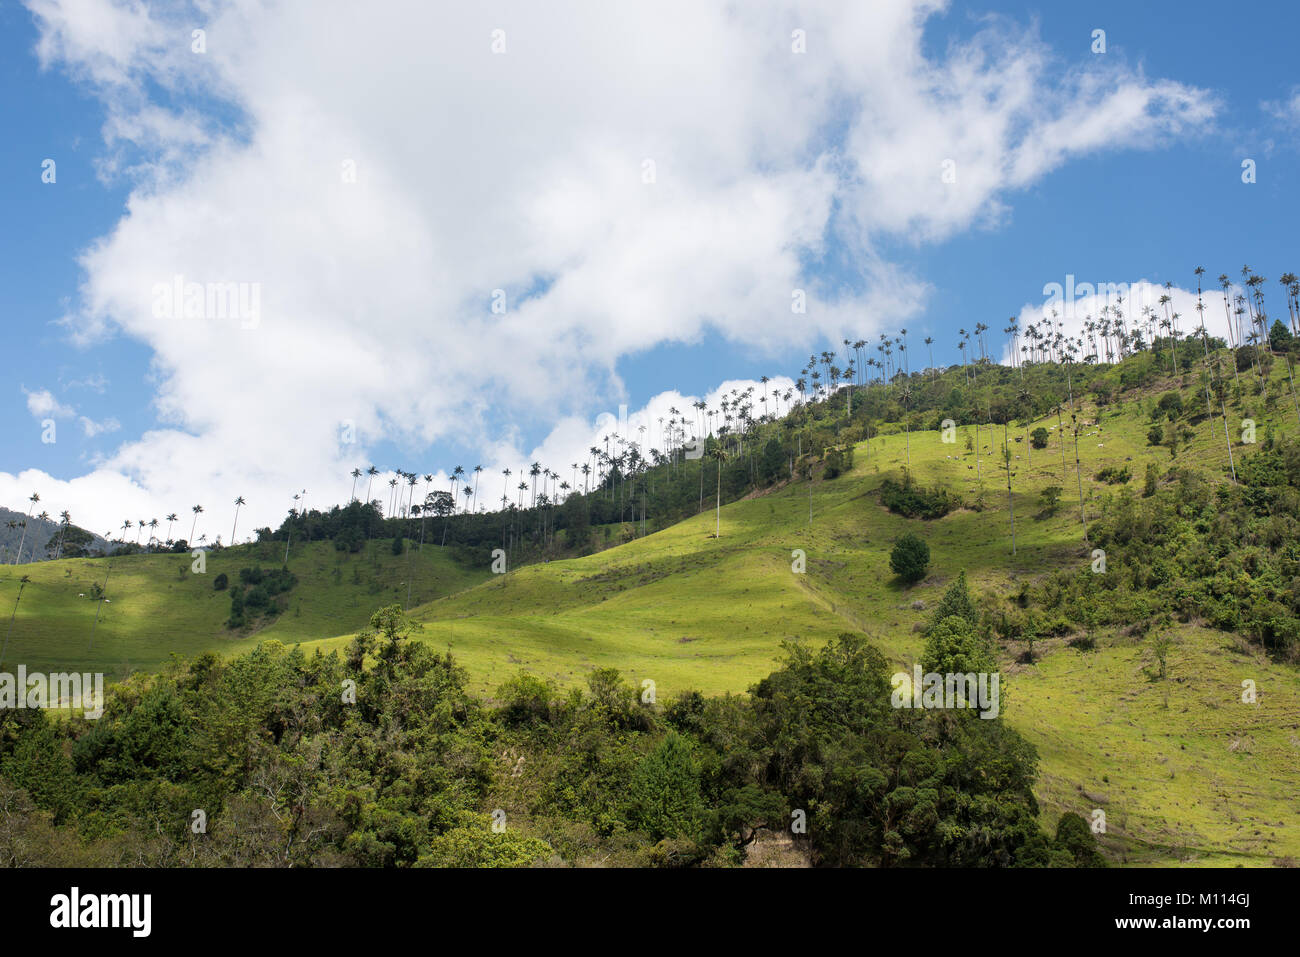 Cocora valley near Salento with enchanting landscape of pines and eucalyptus towered over by the famous giant wax palms, clear blue sky, Colombia Stock Photo